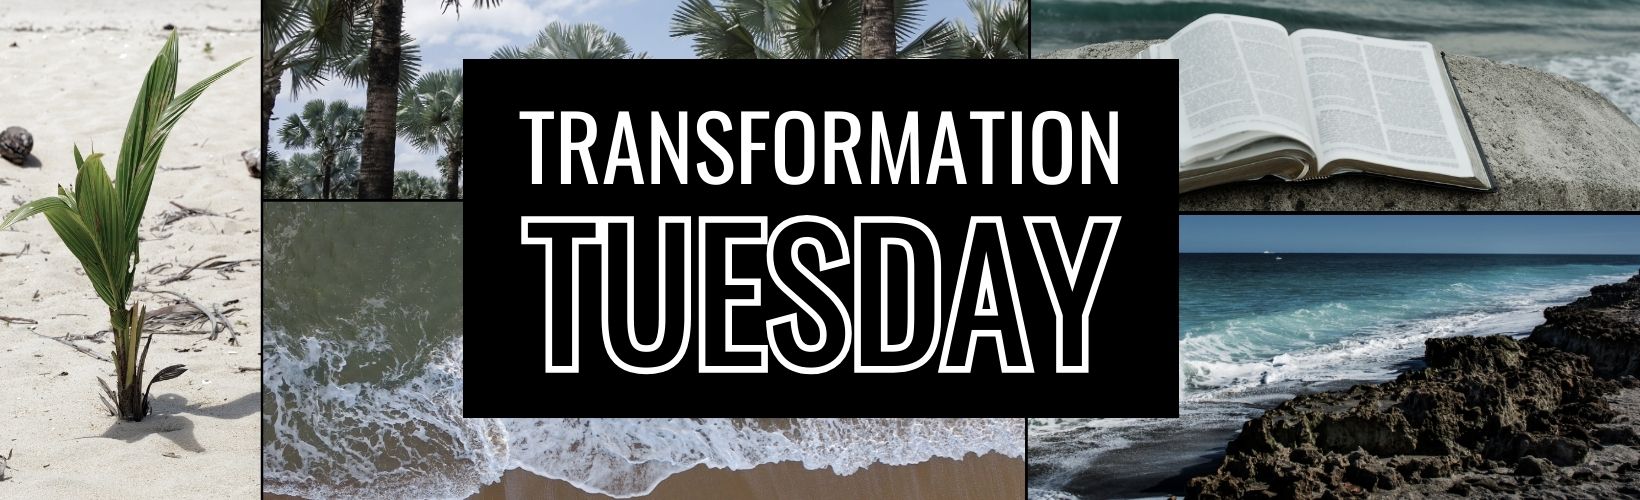 Transformation Tuesday: How to Transform Your Habits and Boost Your Productivity